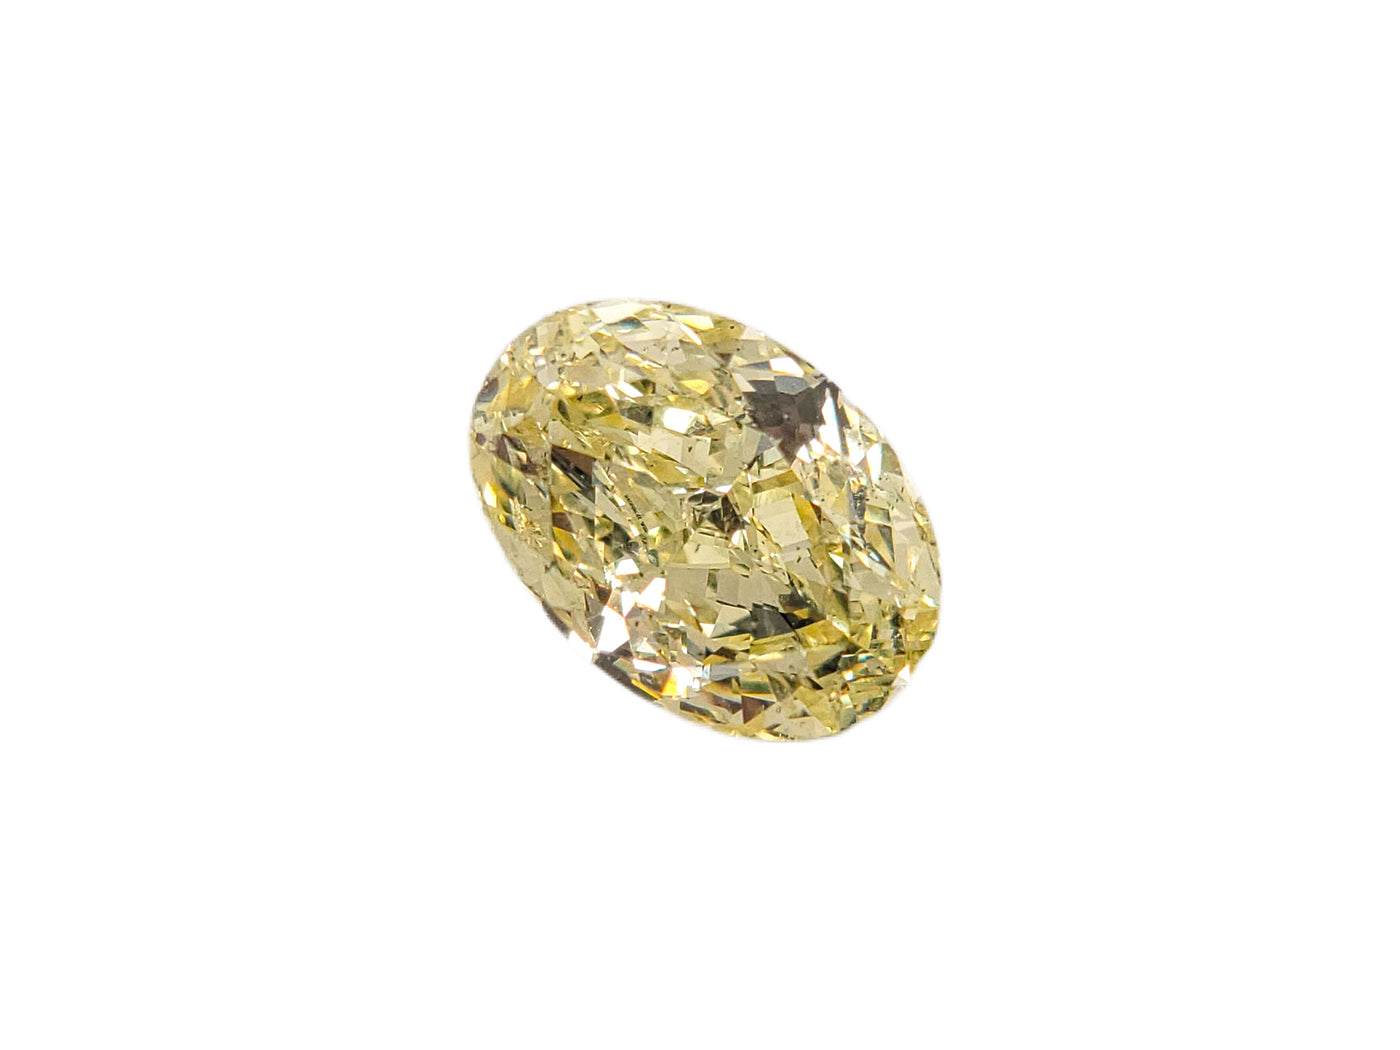 2.23ct Fancy Light Yellow Oval SI1 GIA